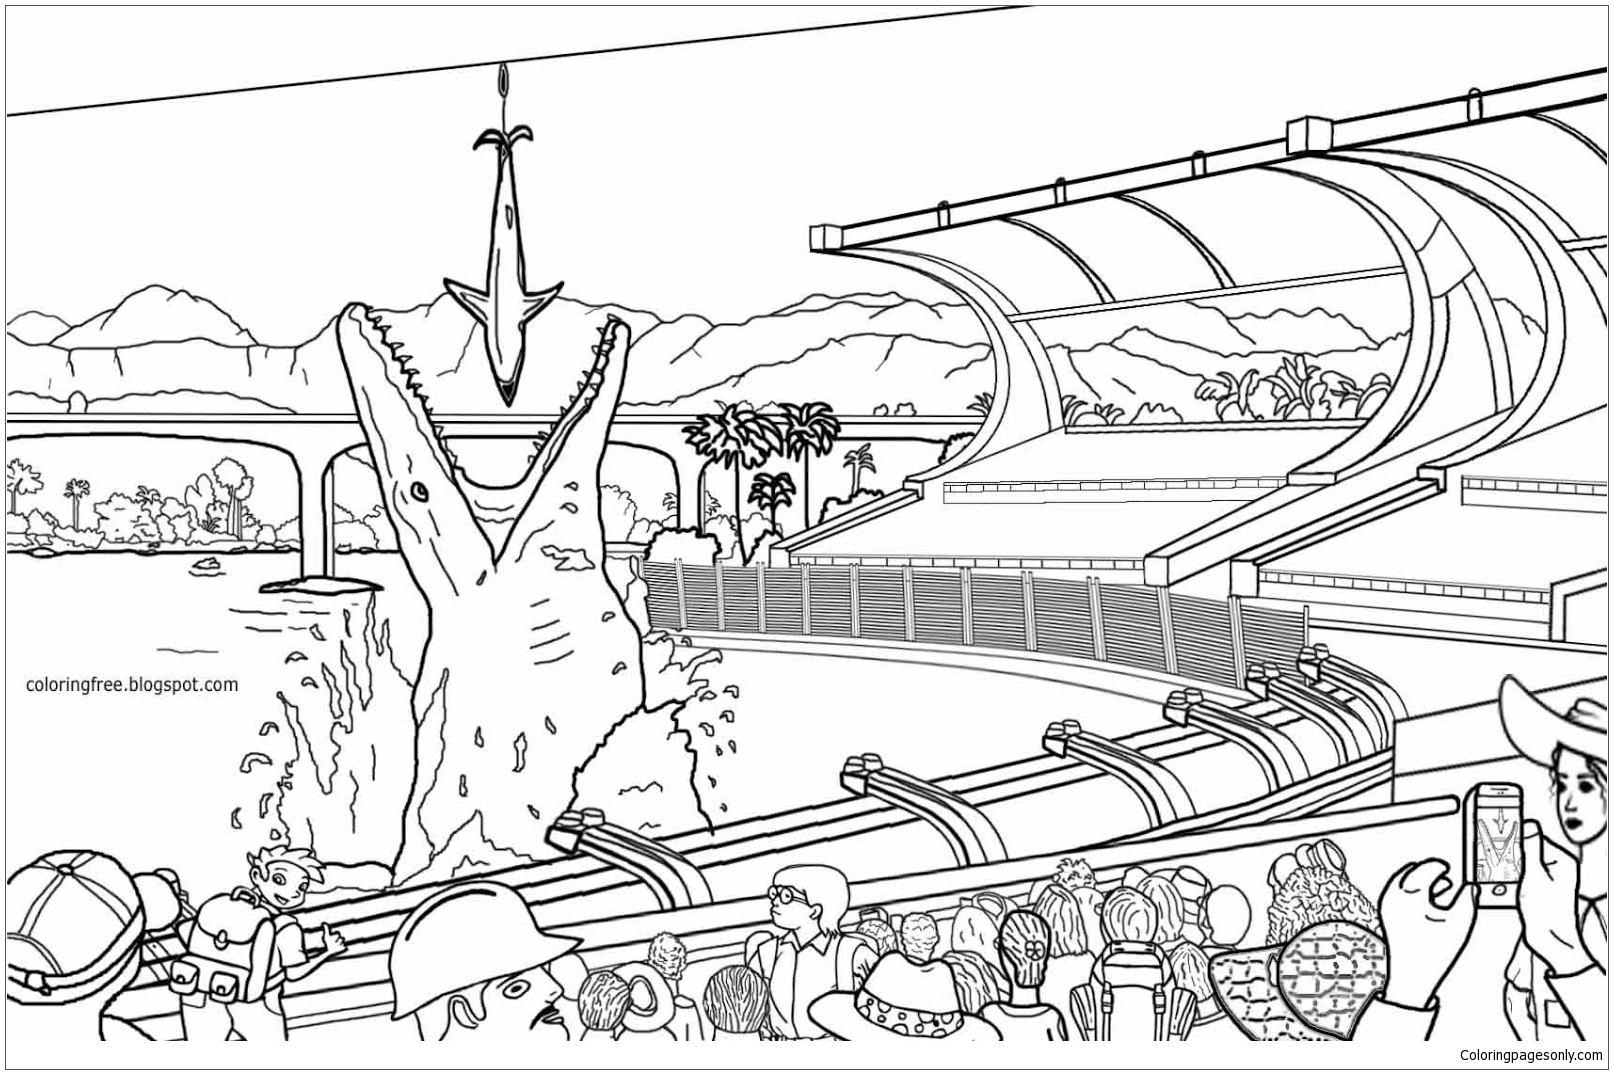 Jurassic World Camp Cretaceous Coloring Pages : LETS COLORING BOOK